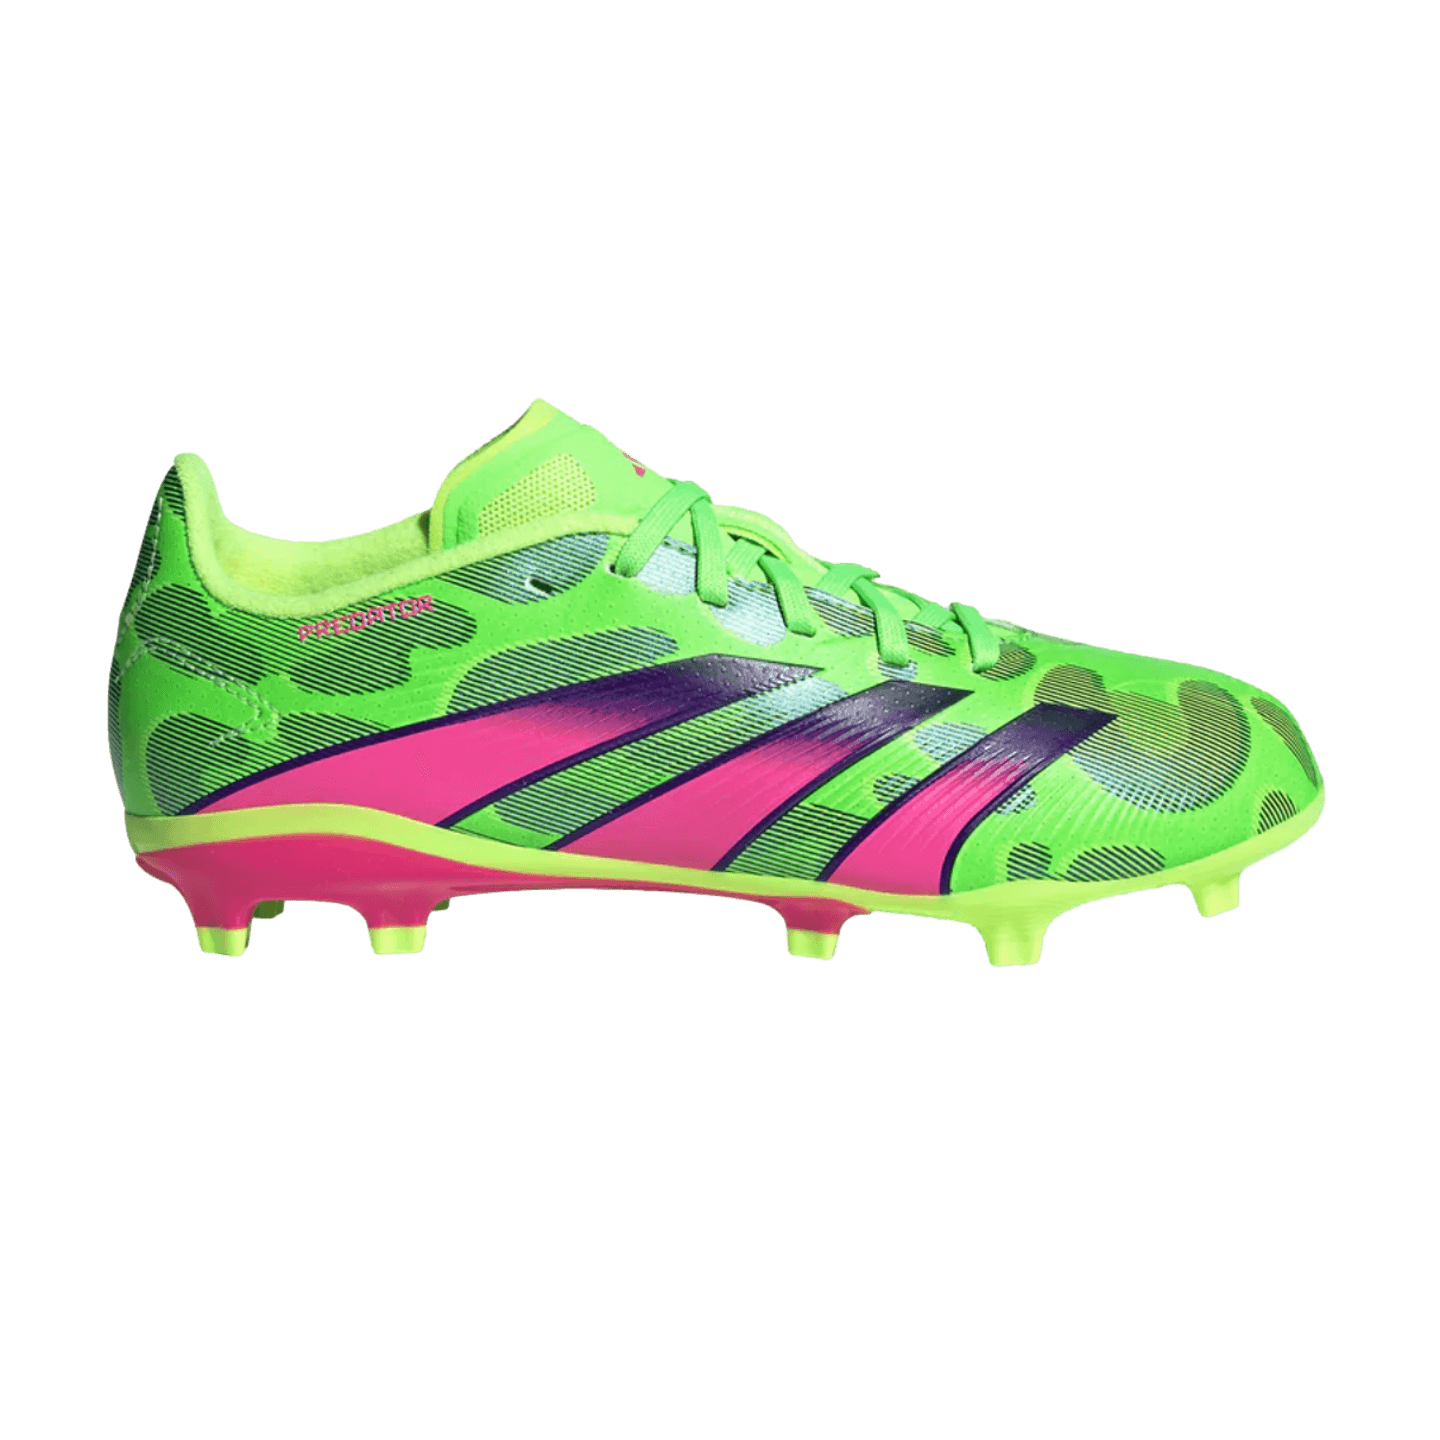 Adidas Predator League Generation Pred Youth Firm Ground Cleats